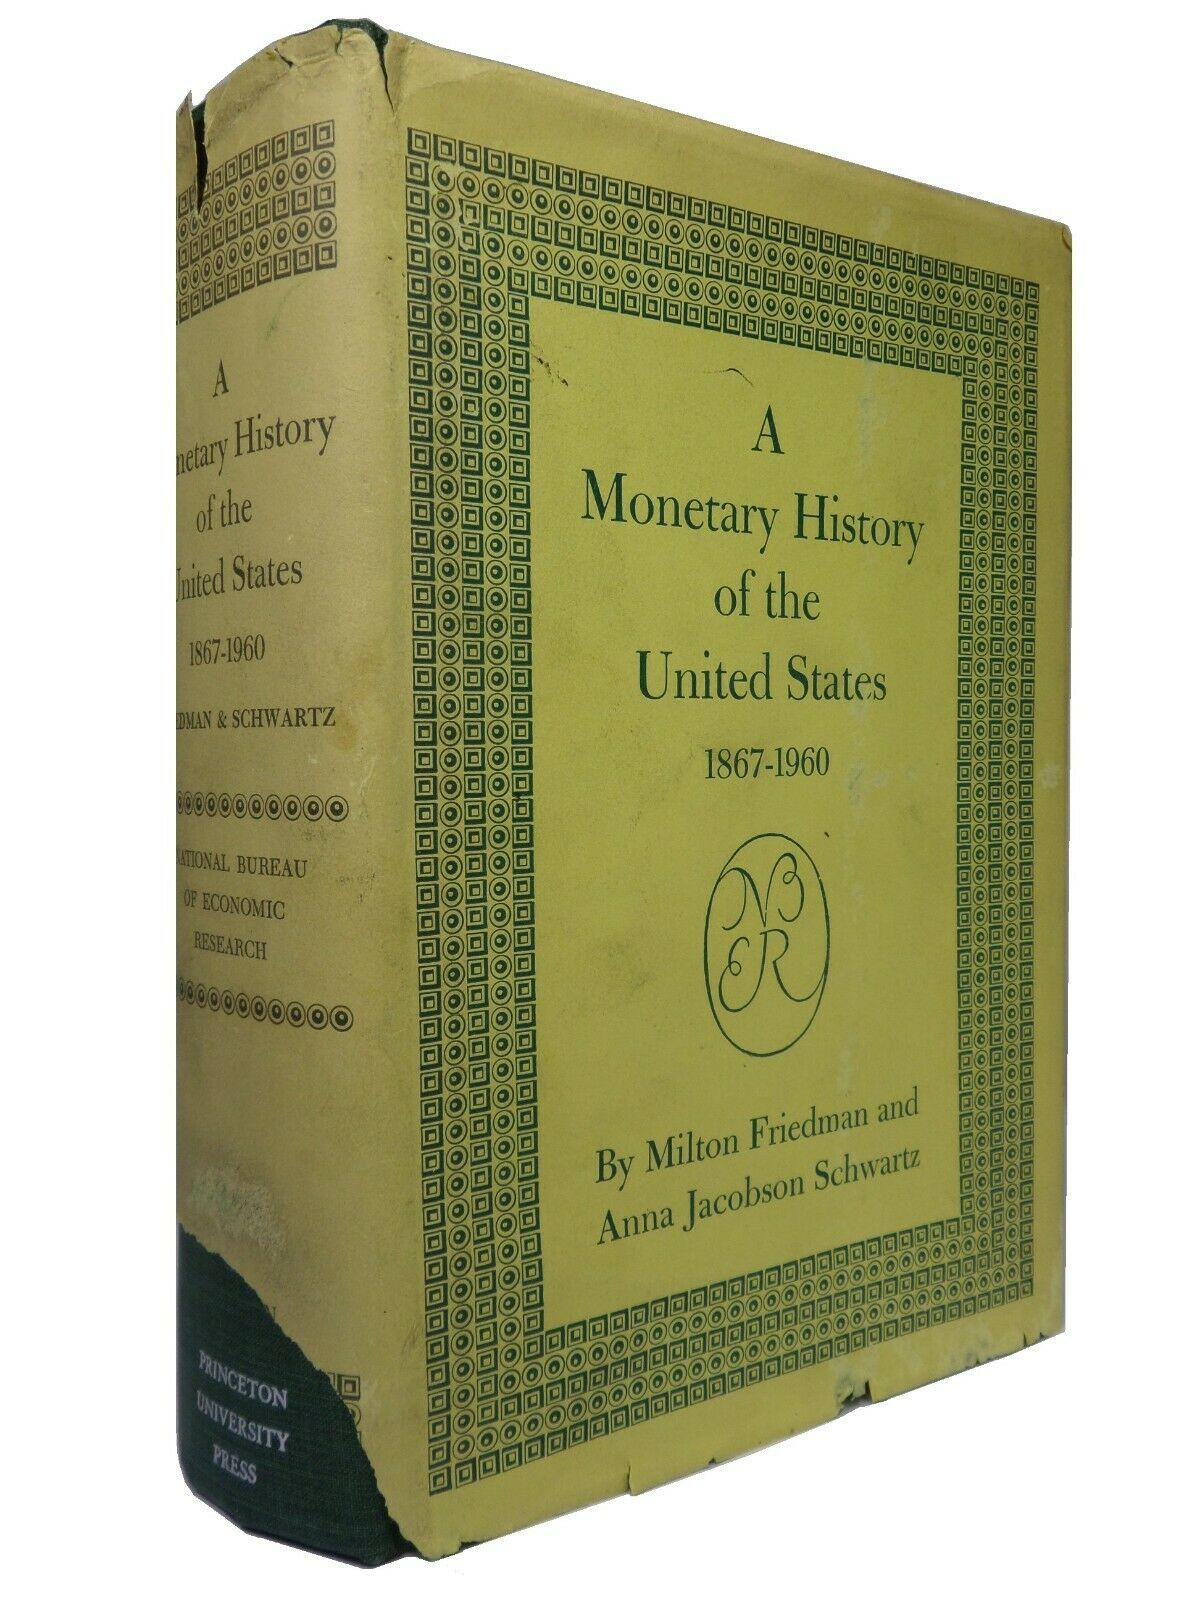 MONETARY HISTORY OF THE UNITED STATES 1867-1960 MILTON FRIEDMAN & ANNA JACOBSON SCHWARTZ FIRST EDITION